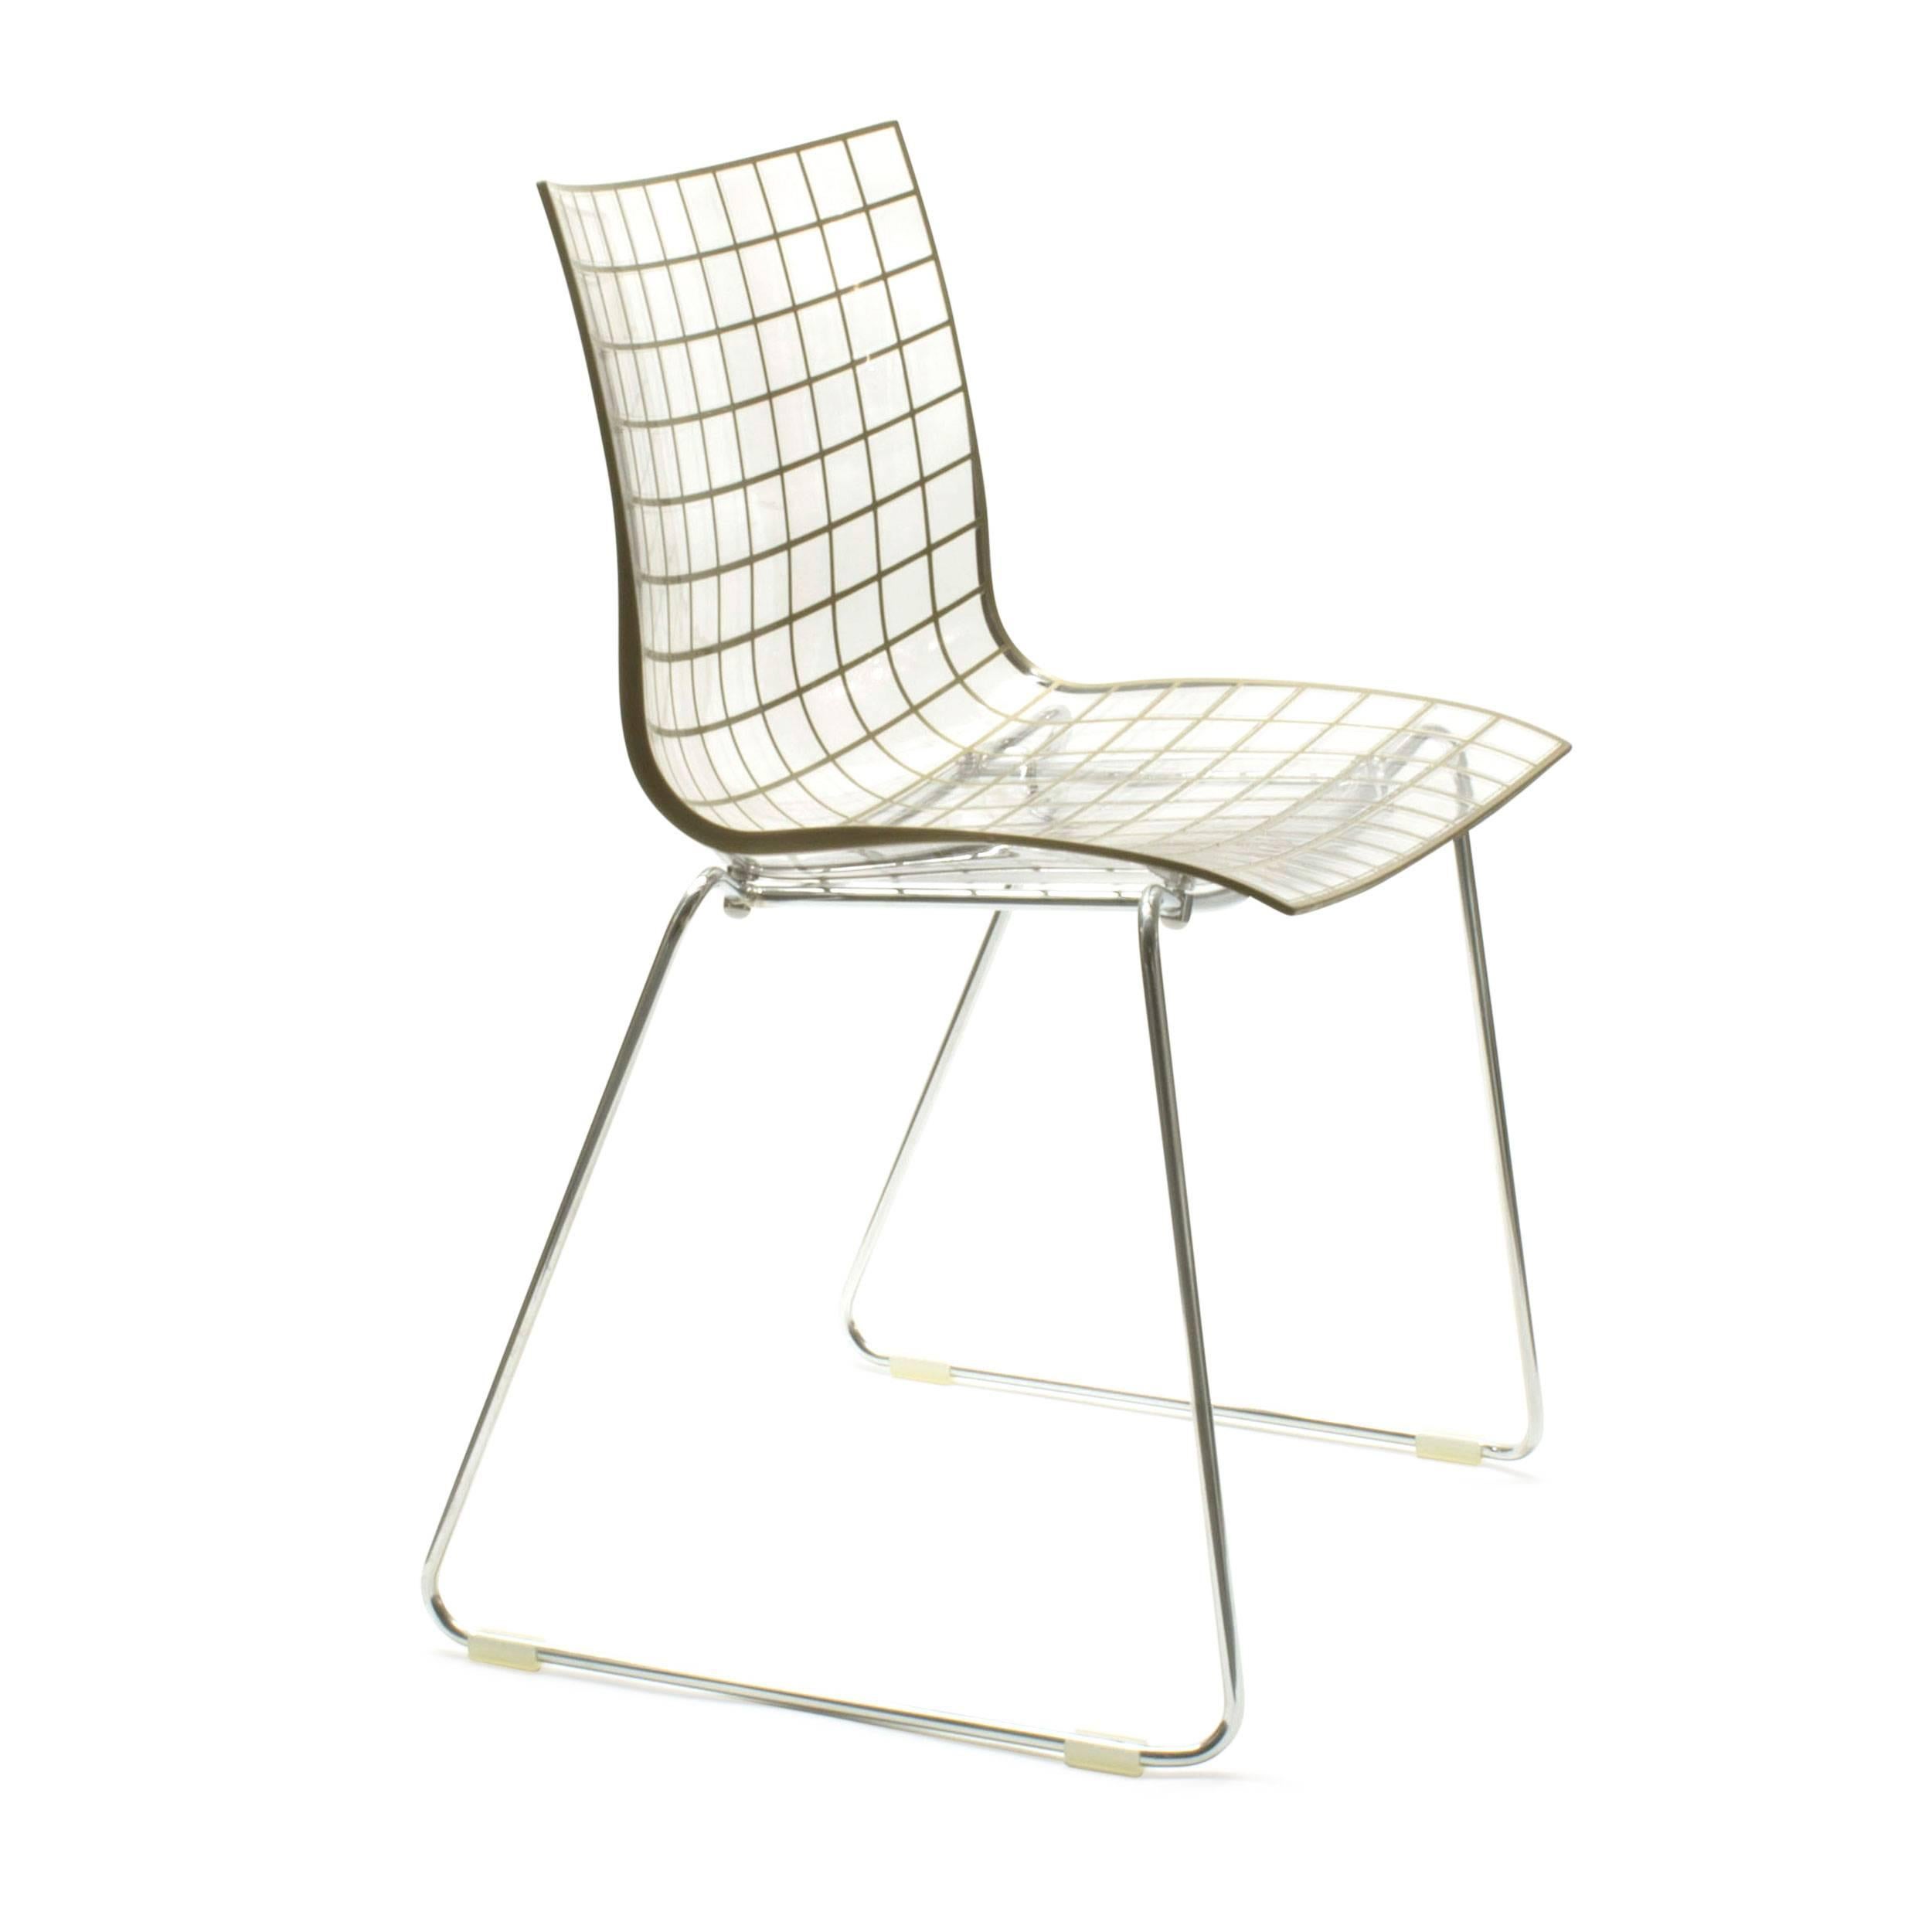 Reminiscent of Bertoia's Classic bird chair, the X3 is a fun, colorful chair that glows with energy. Perfect for residential or commercial spaces, the chair is supported with an embedded Desmopan lattice that shines through, providing a sound